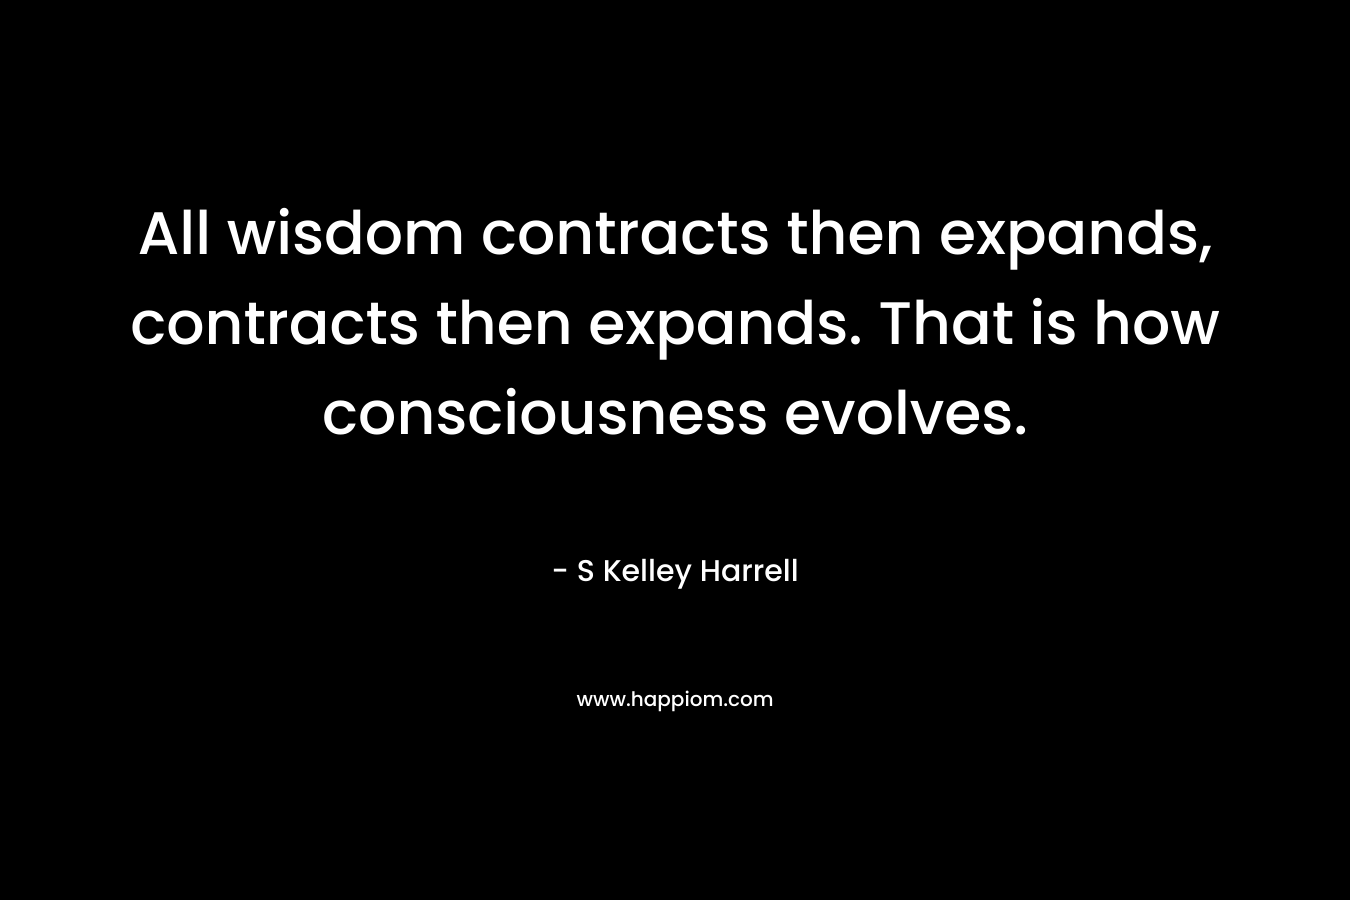 All wisdom contracts then expands, contracts then expands. That is how consciousness evolves. – S Kelley Harrell